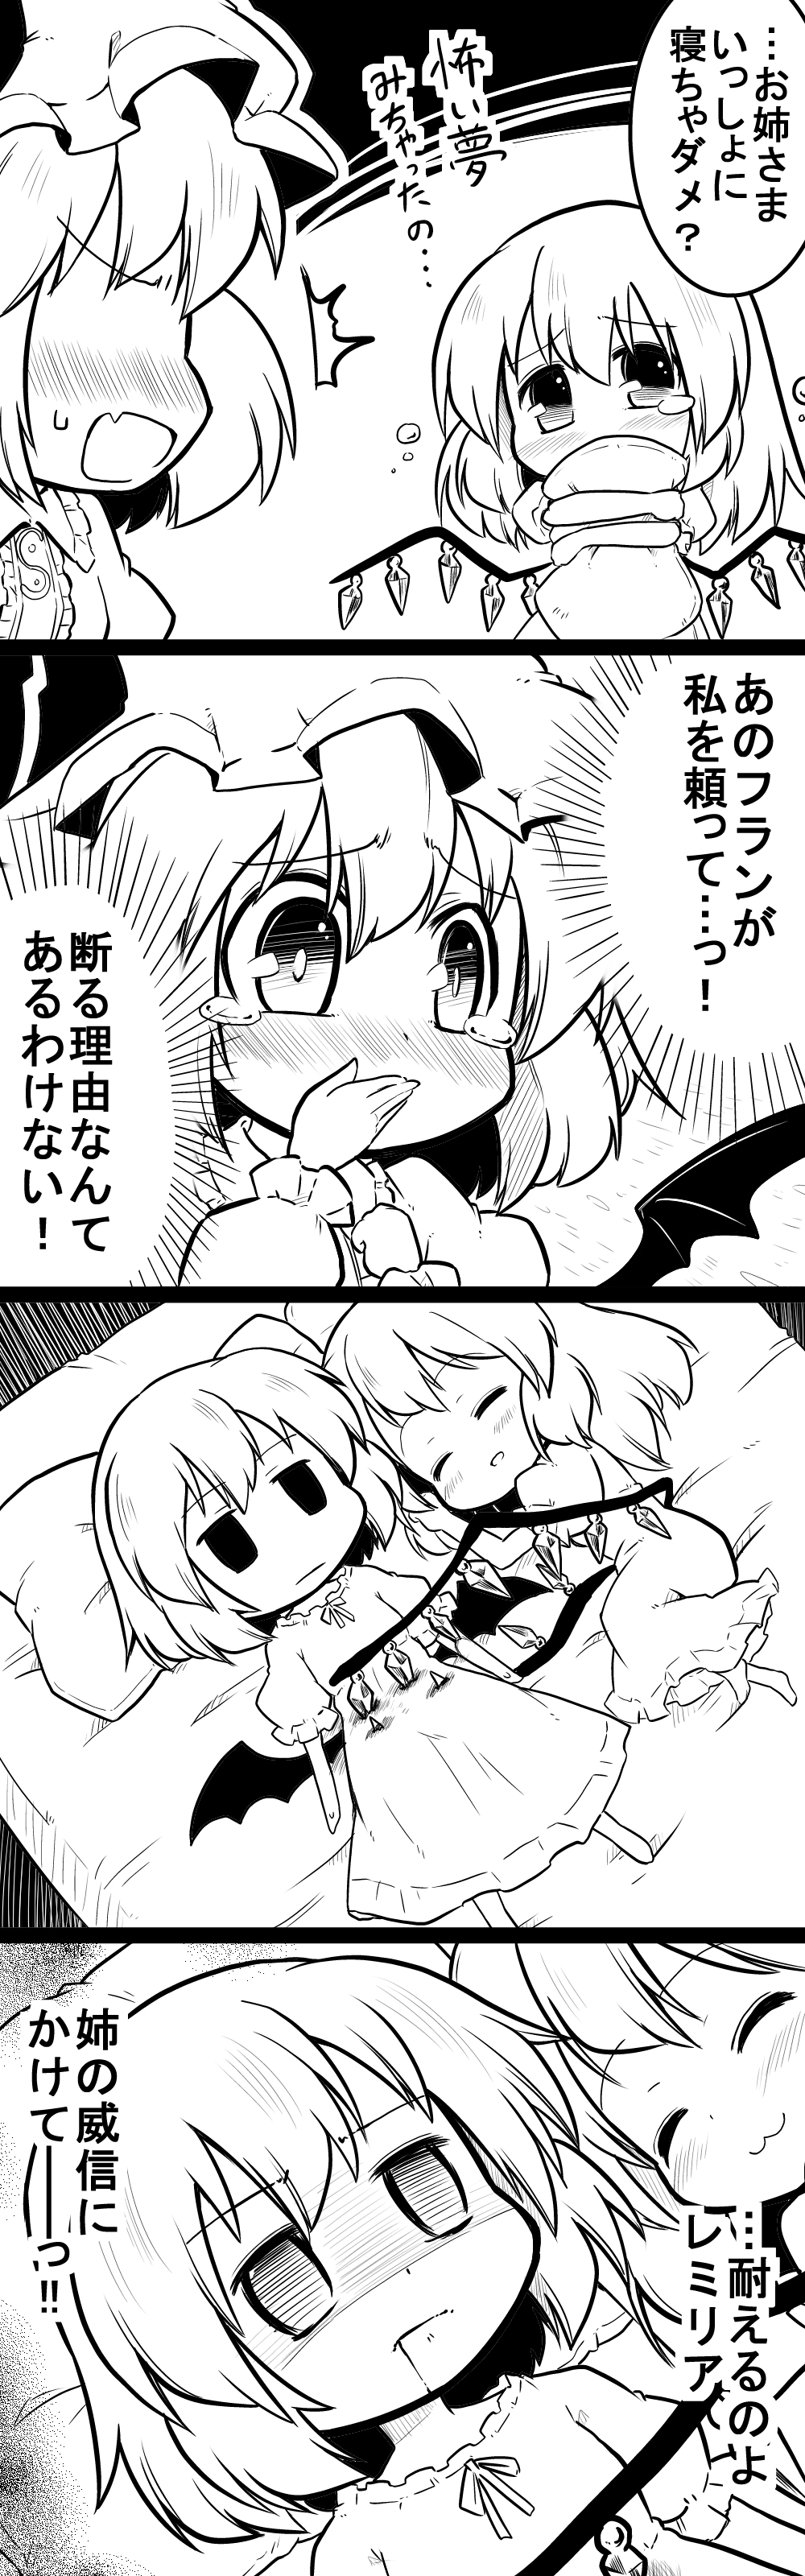 /\/\/\ 2girls 3: 4koma :3 ^_^ absurdres alternate_costume bat_wings bed blood blood_from_mouth blush closed_eyes comic commentary covering_mouth empty_eyes fang flandre_scarlet futa4192 hat highres impaled long_hair mob_cap monochrome multiple_girls nightgown open_mouth pajamas pillow pillow_hug remilia_scarlet shaded_face short_hair sleeping stabbed stabbing tears touhou translated wing_hug wings